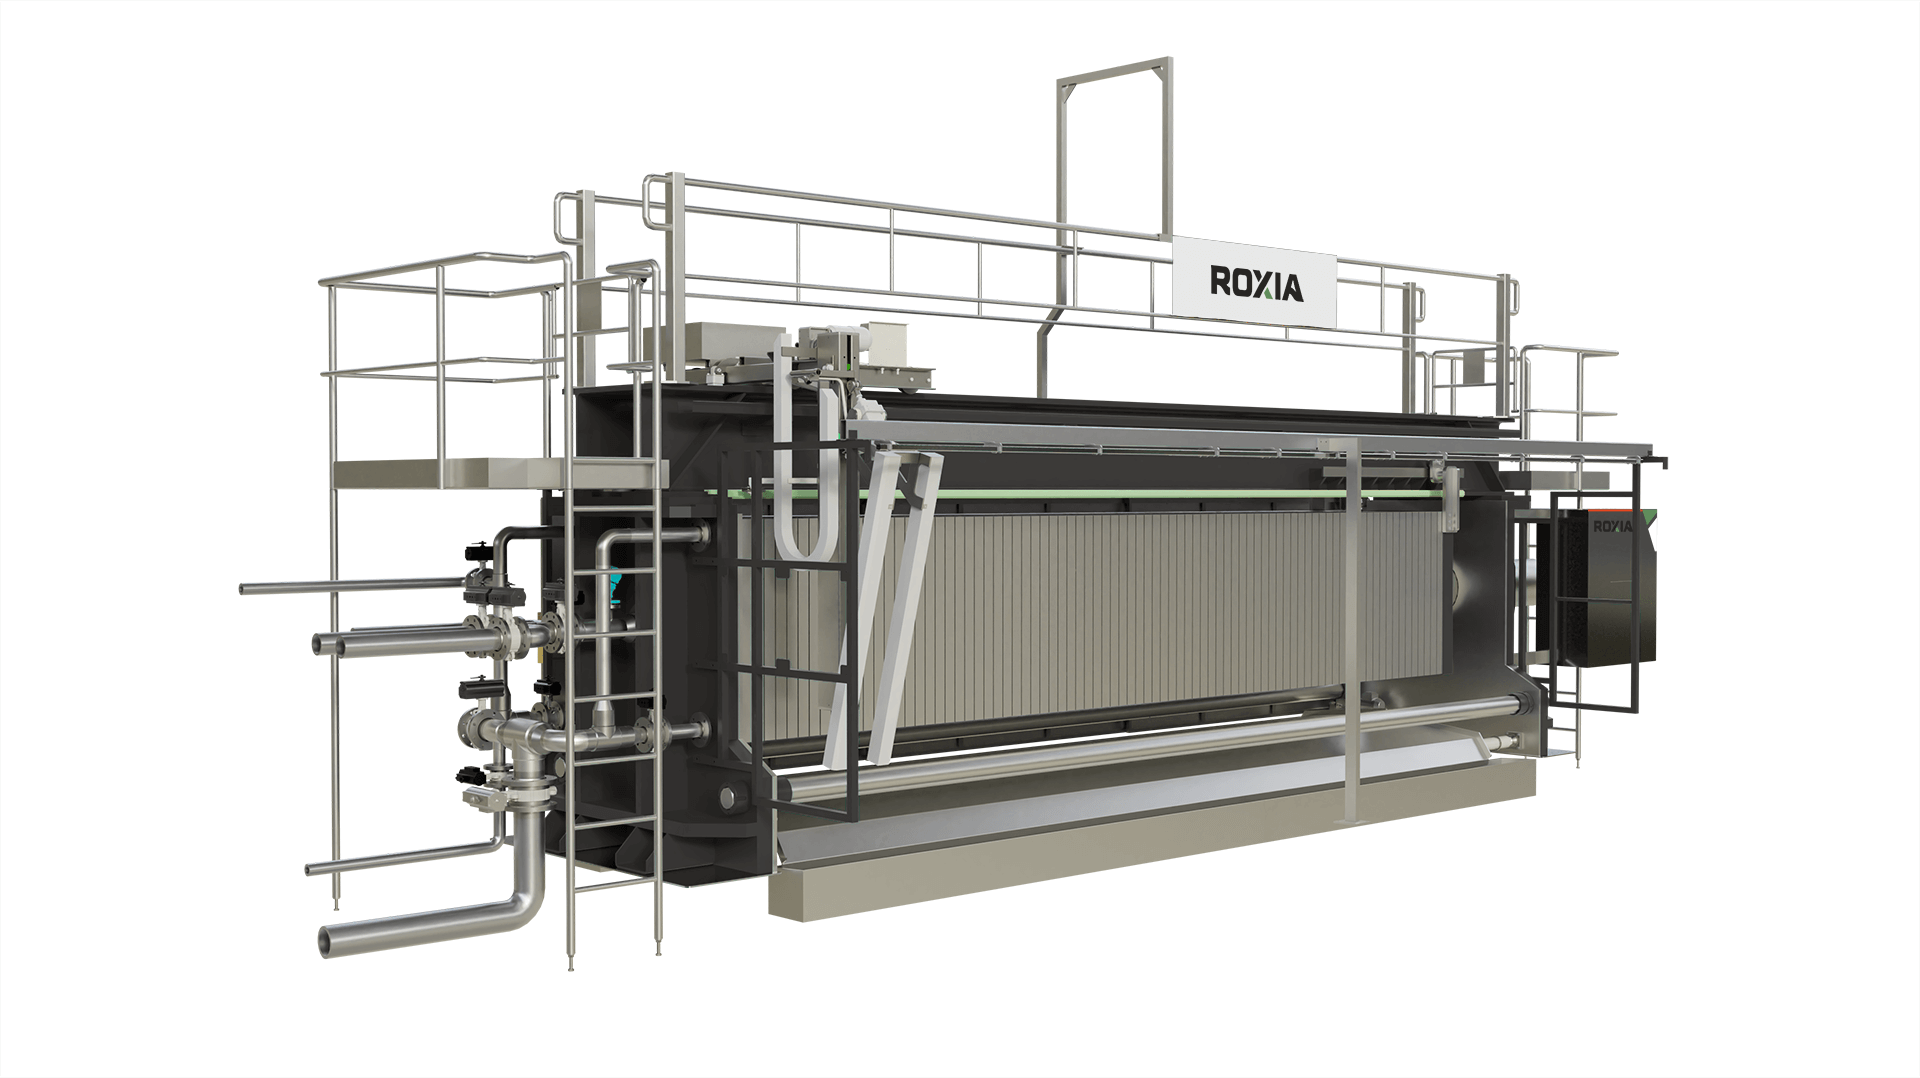 Roxia Filter Press (FP) delivers fully automatic operation, advanced filter press technology and high capacity.